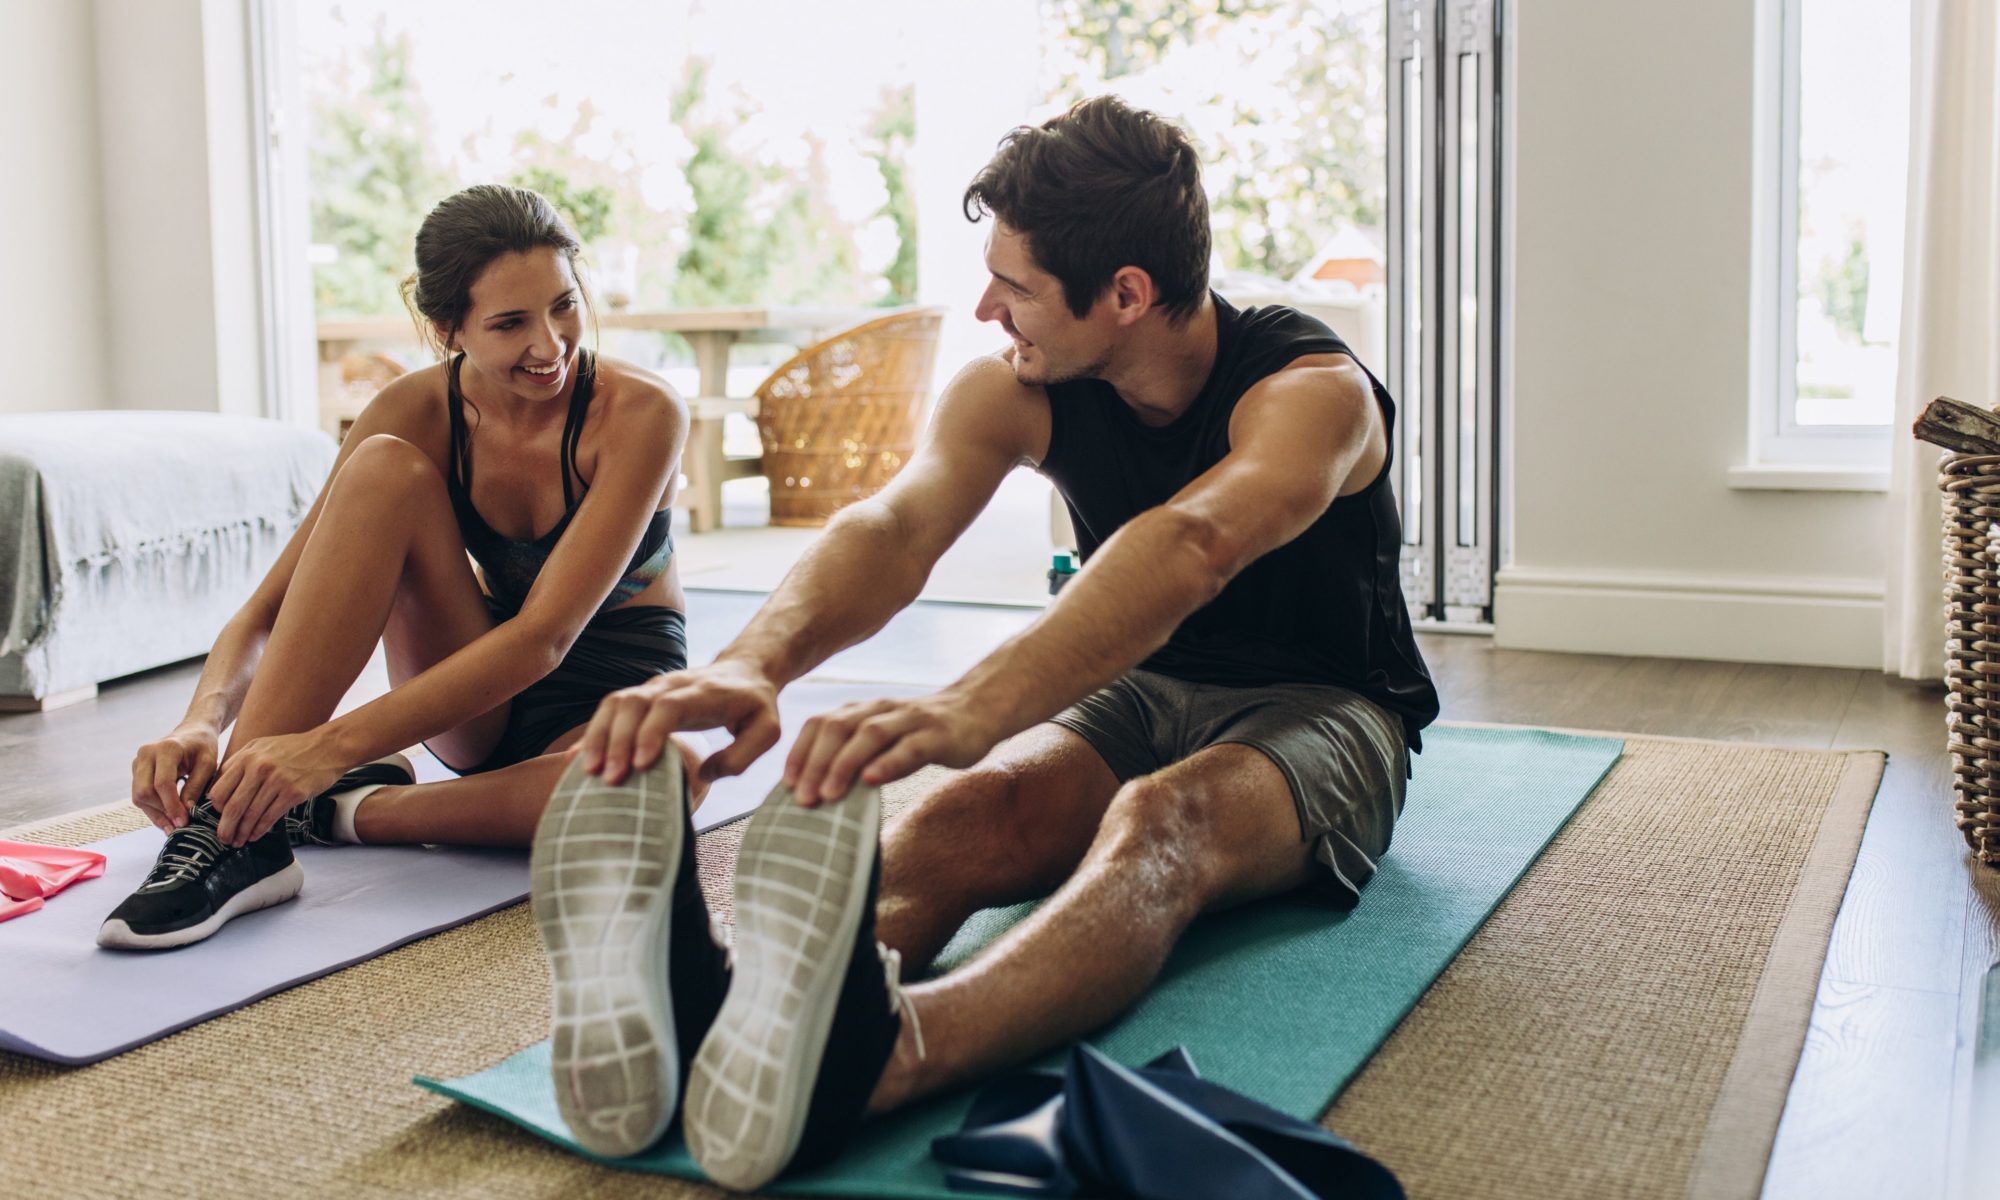 Volvo and Openfit join forces for streamed workout classes for in-room tablets